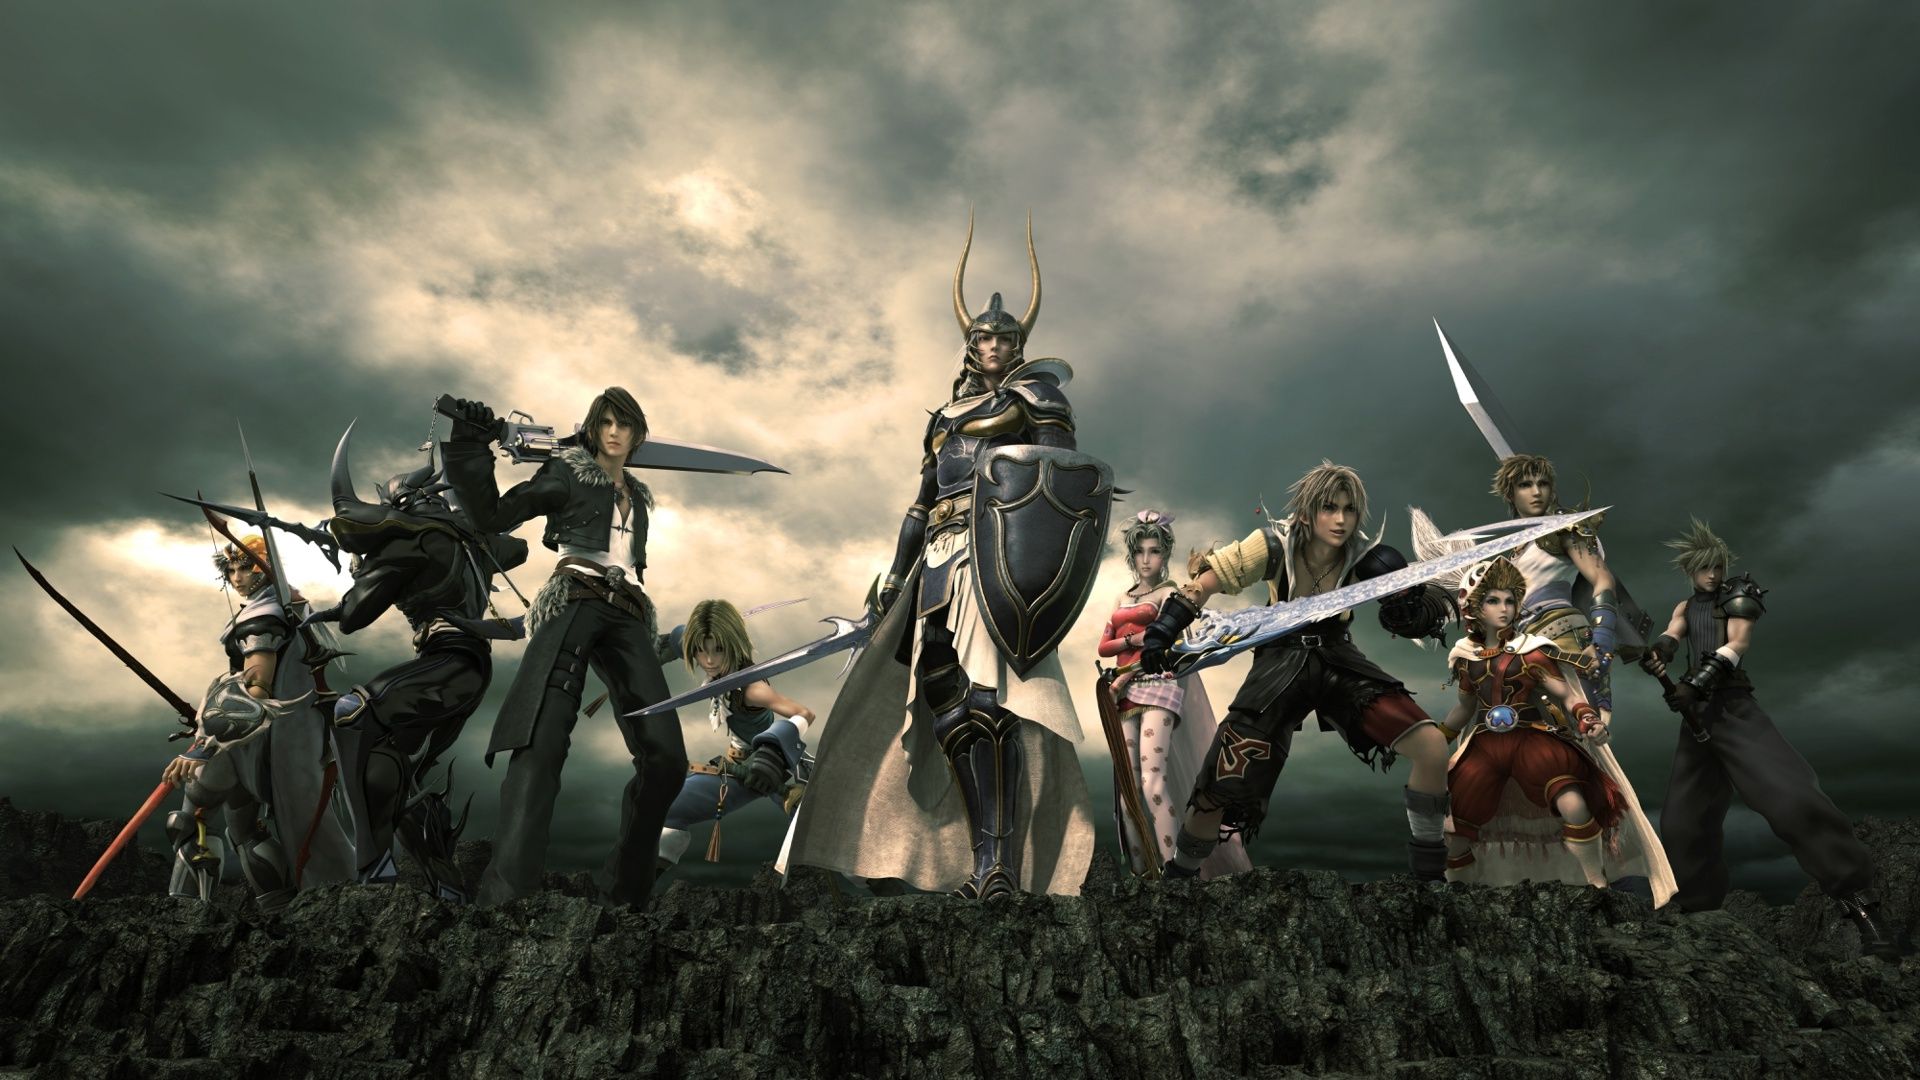 Final Fantasy HD 1920x1080 Wallpapers, 1920x1080 Wallpapers